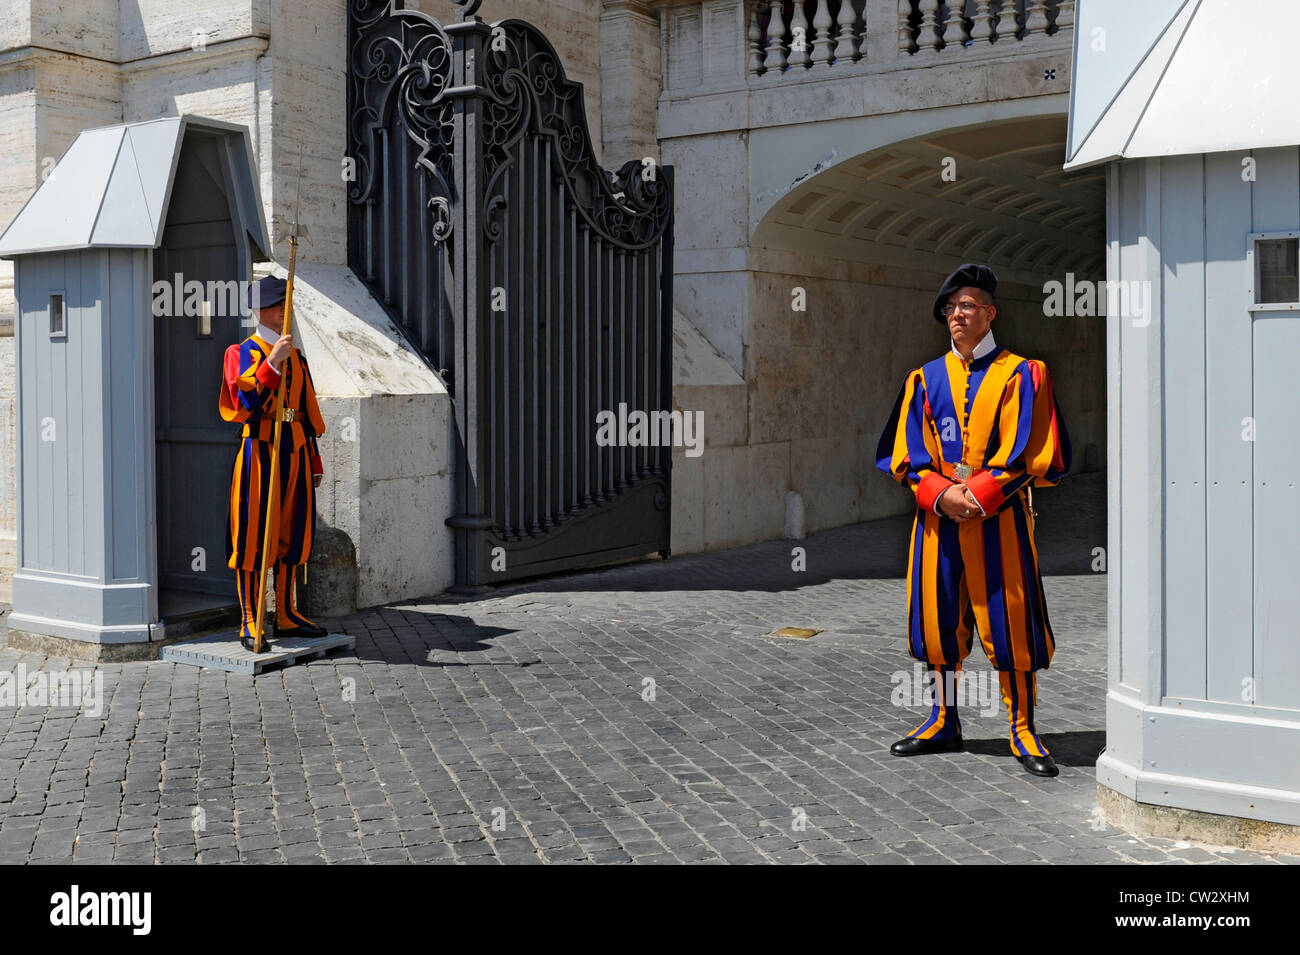 Uniformed Vatican guards outside Rome Italy Europe Stock Photo